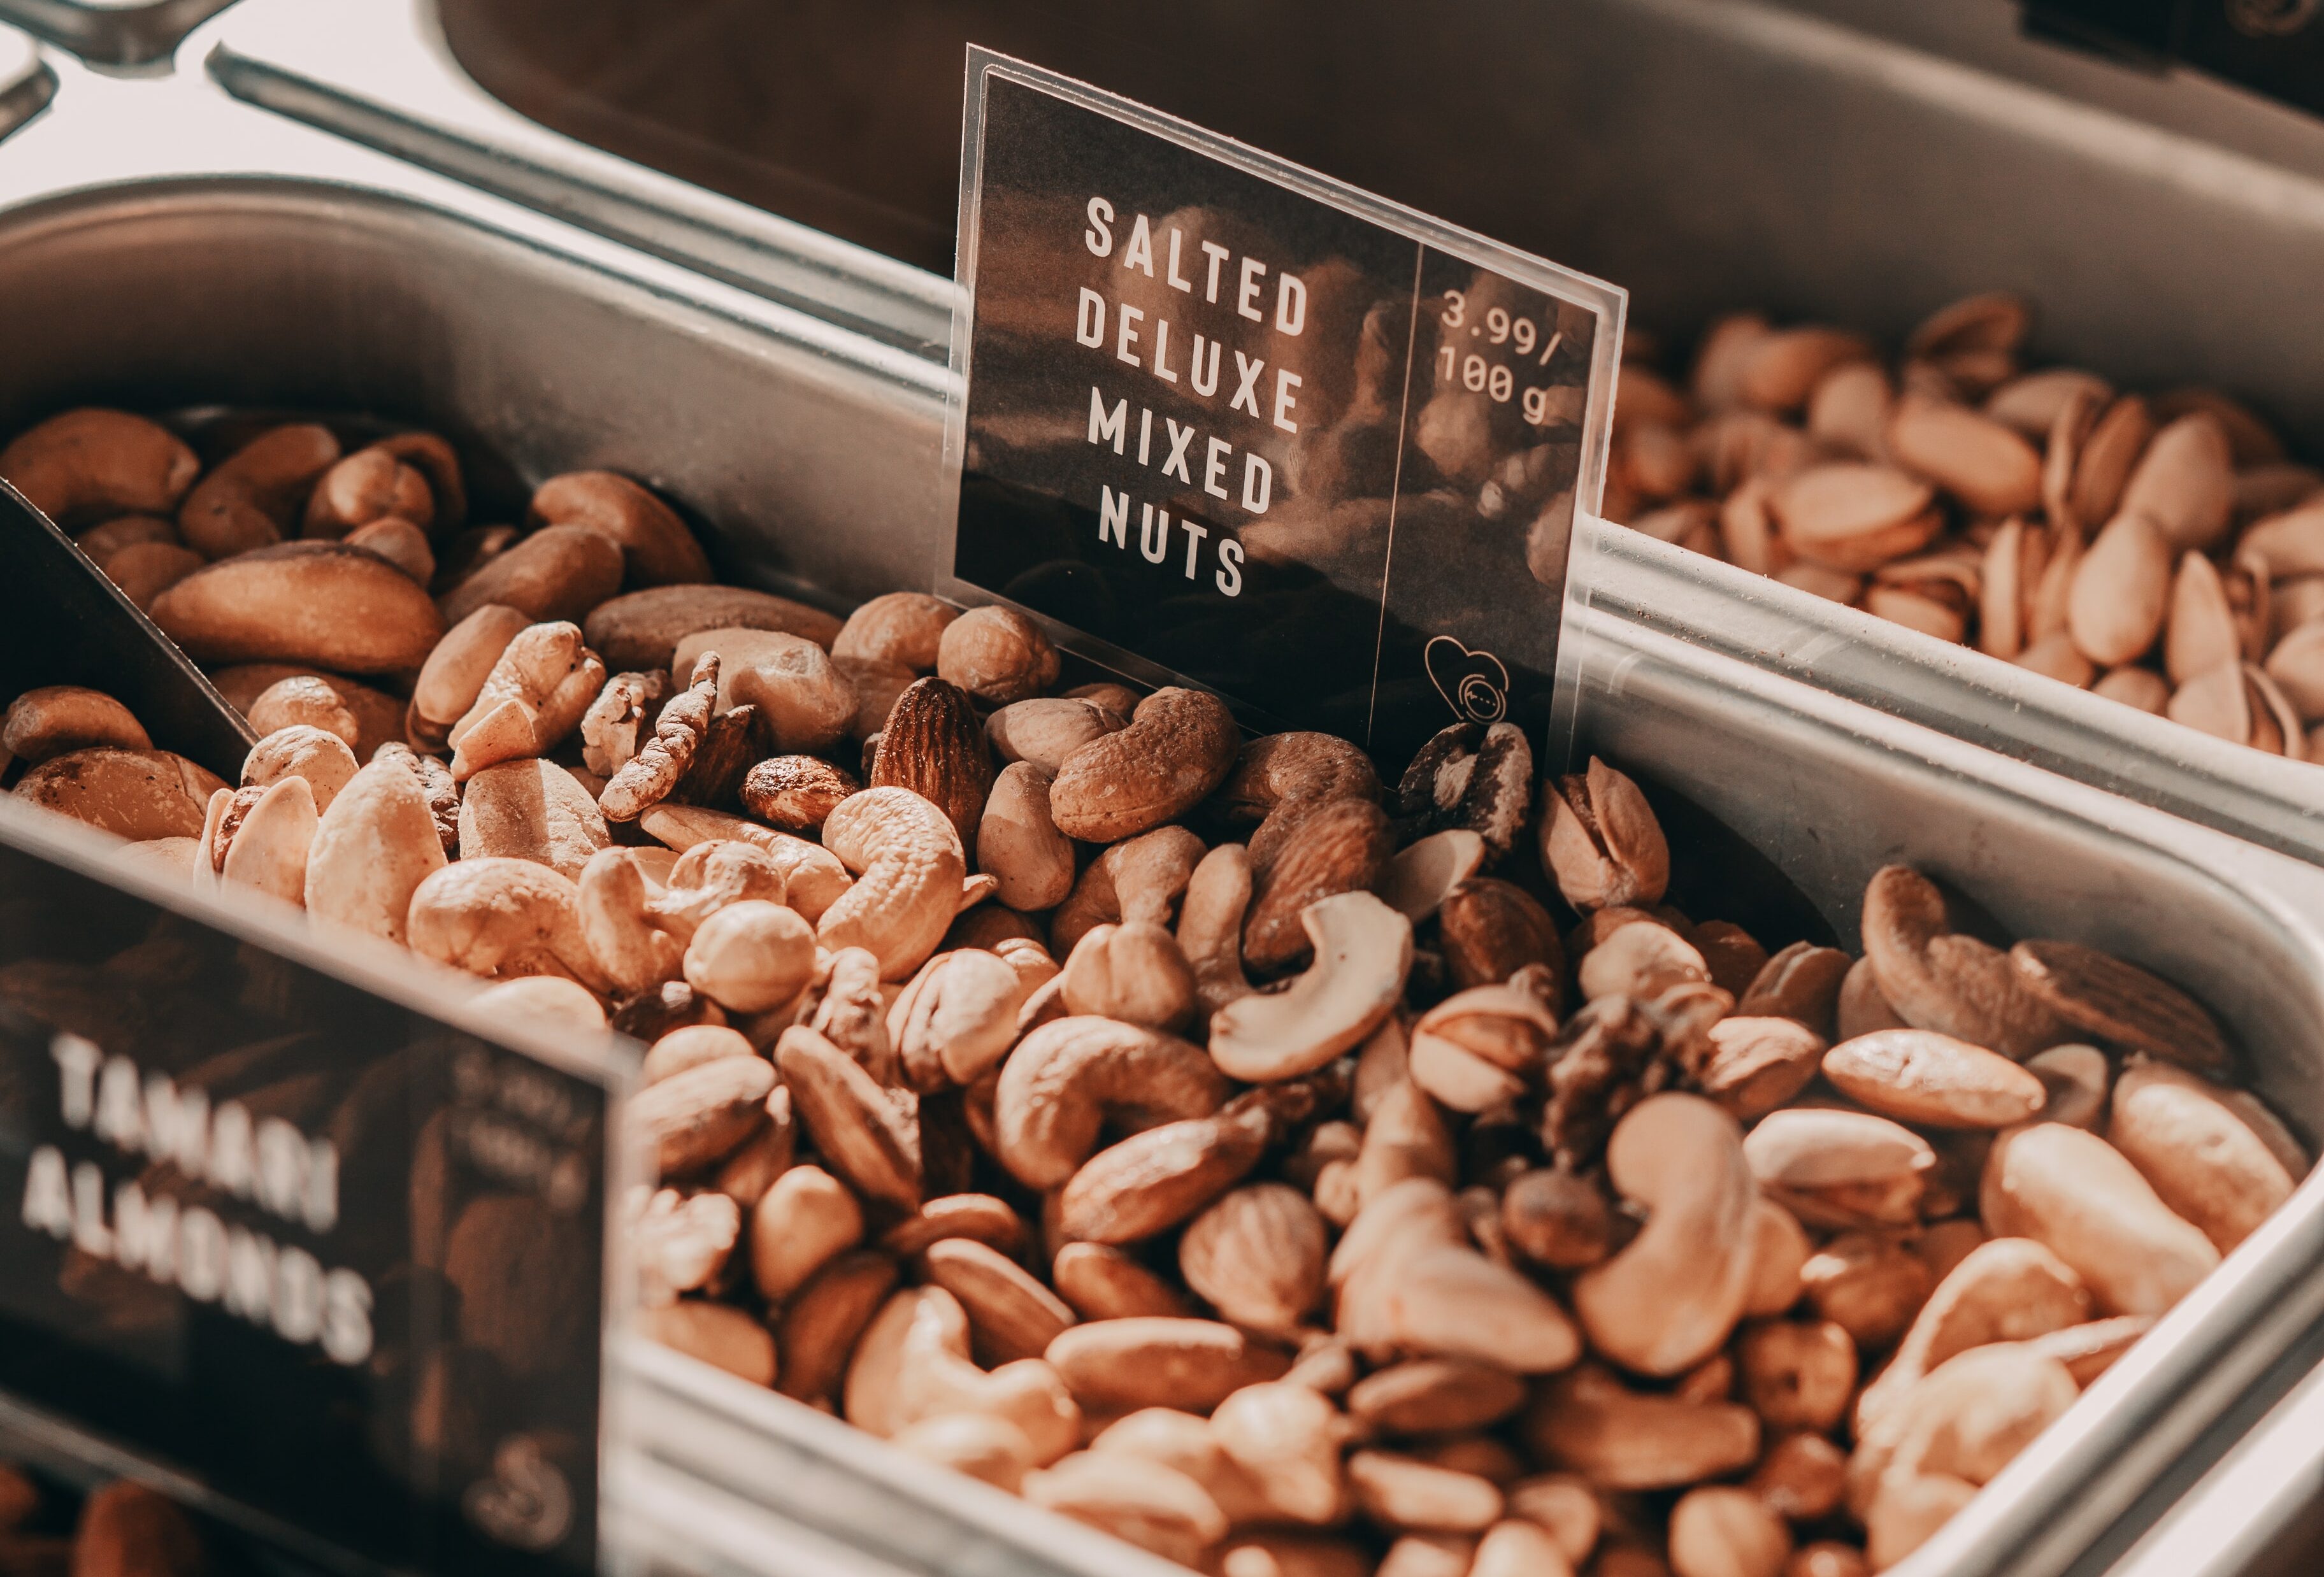 What is a healthy serving of nuts?